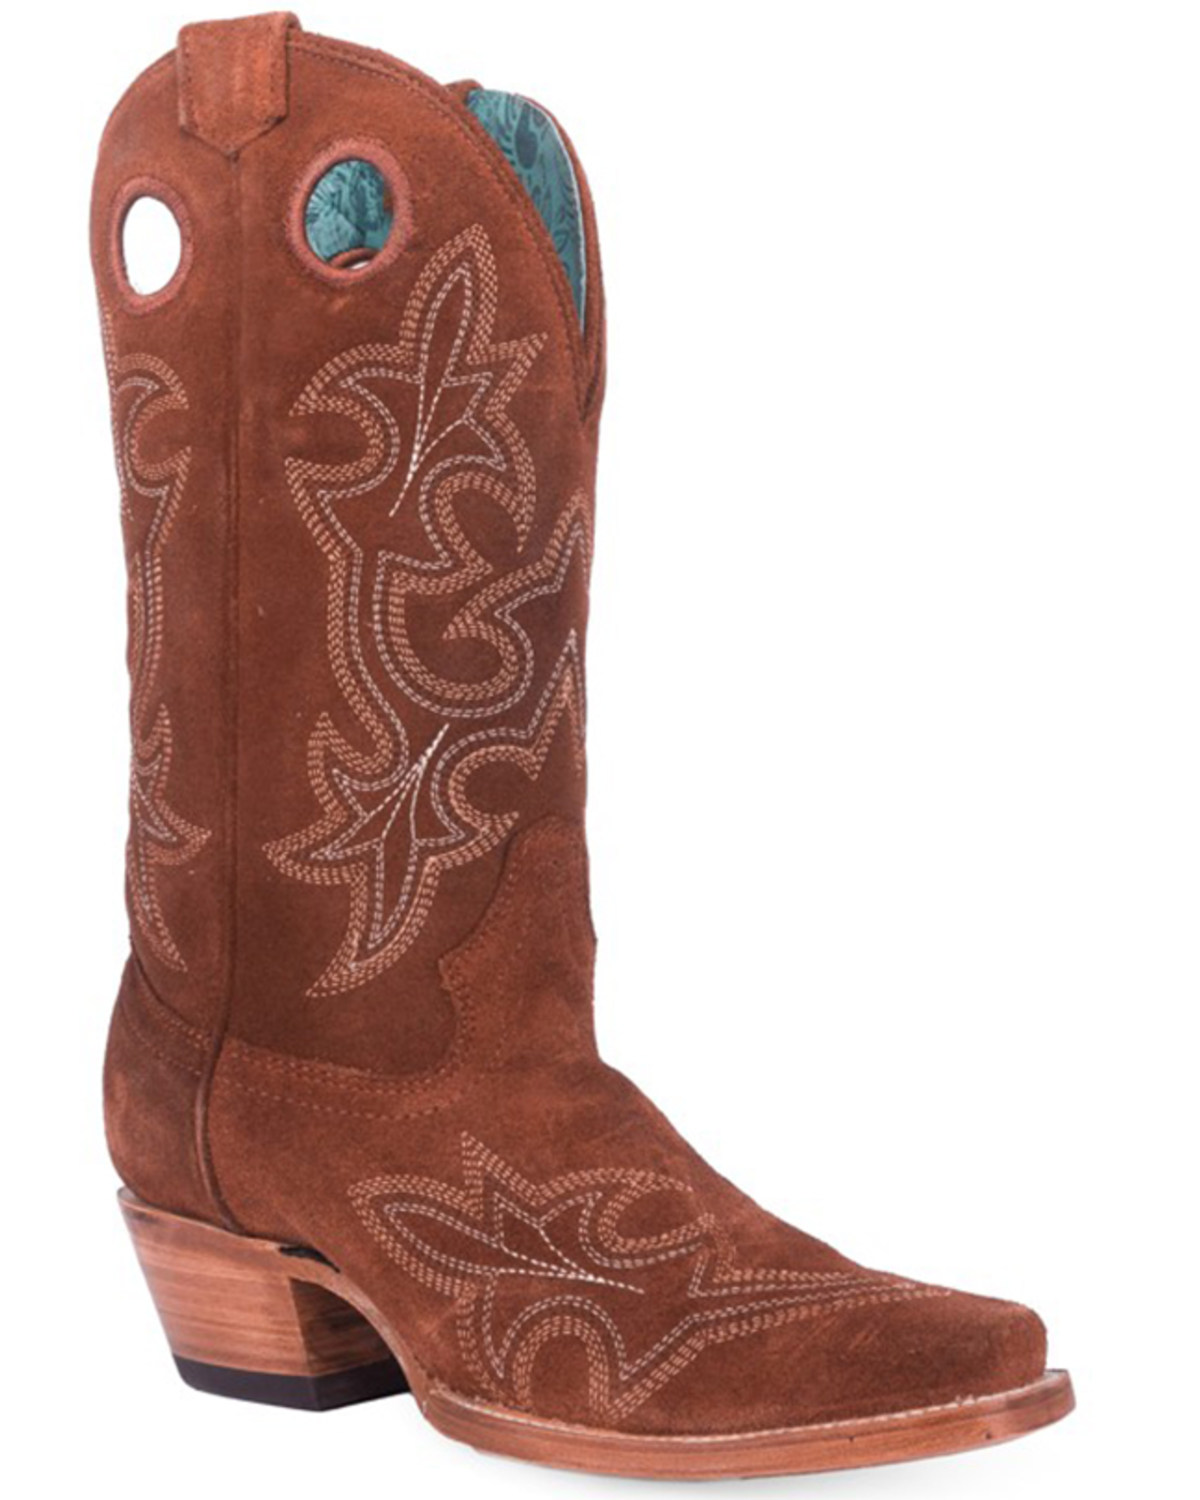 Corral Women's Shedron Suede Western Boots - Square Toe